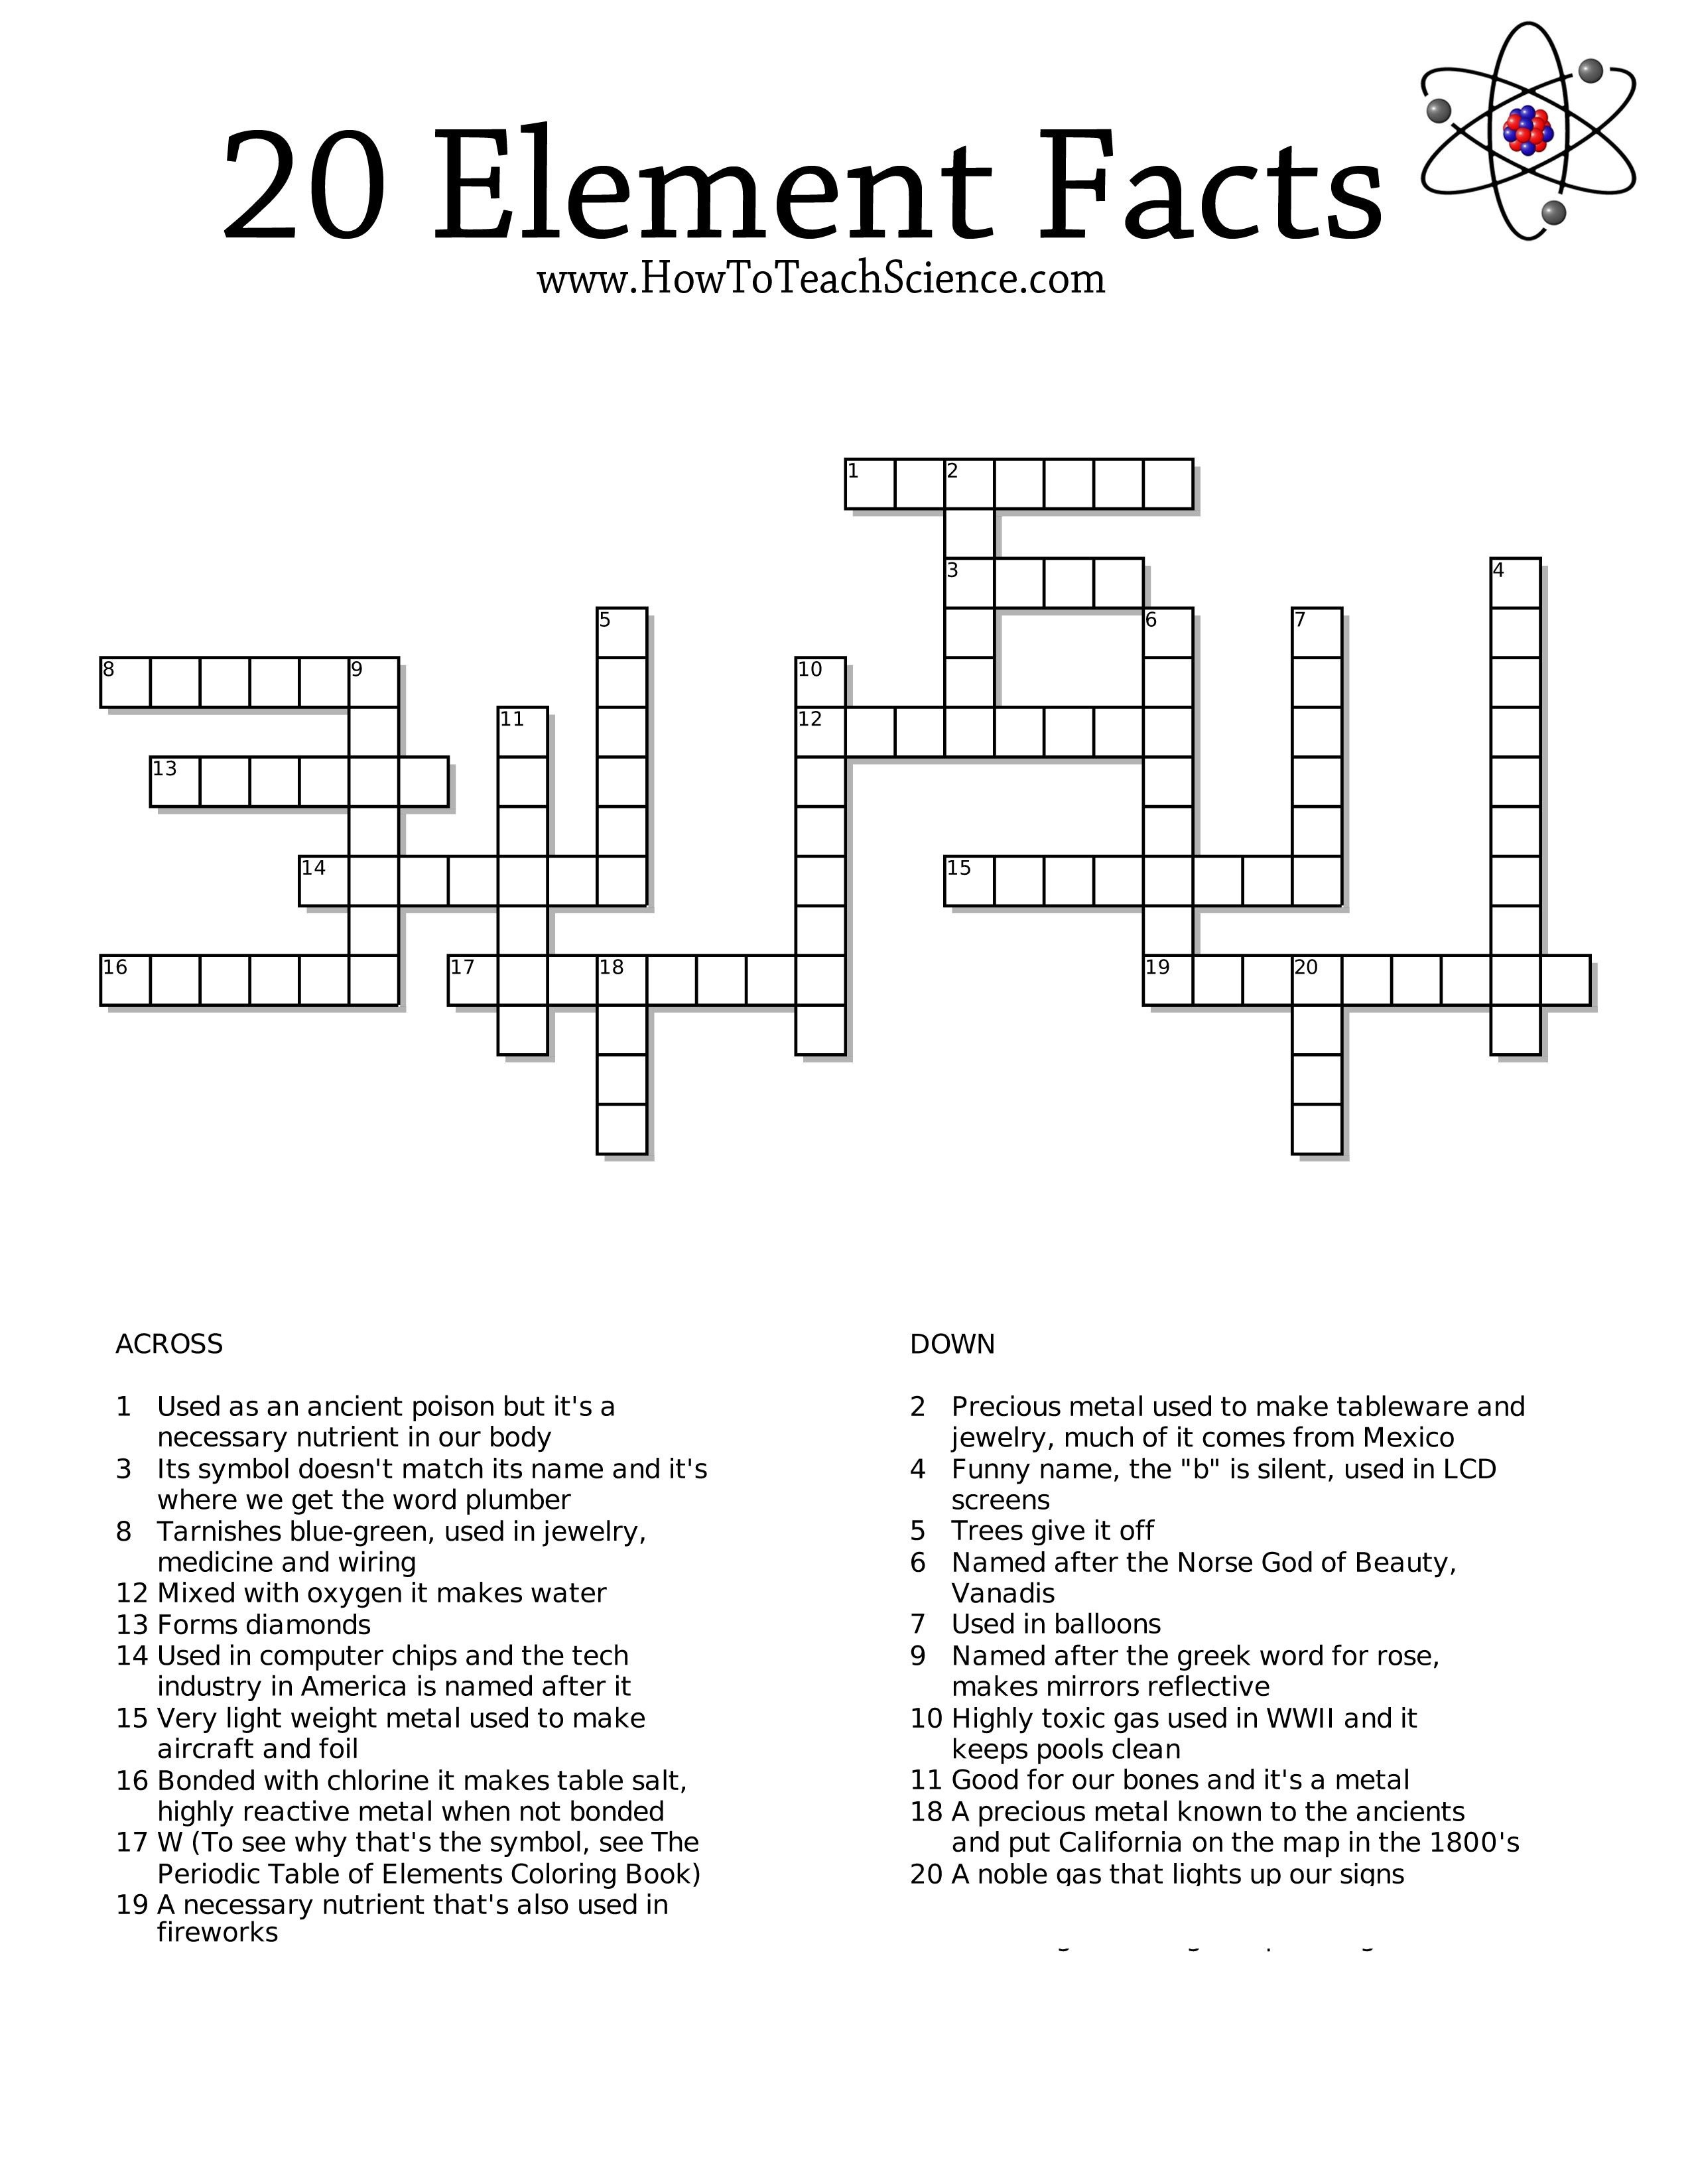 Free Crossword Printables On The Elements For 3Rd Grade Through High - Free Printable Science Crossword Puzzles